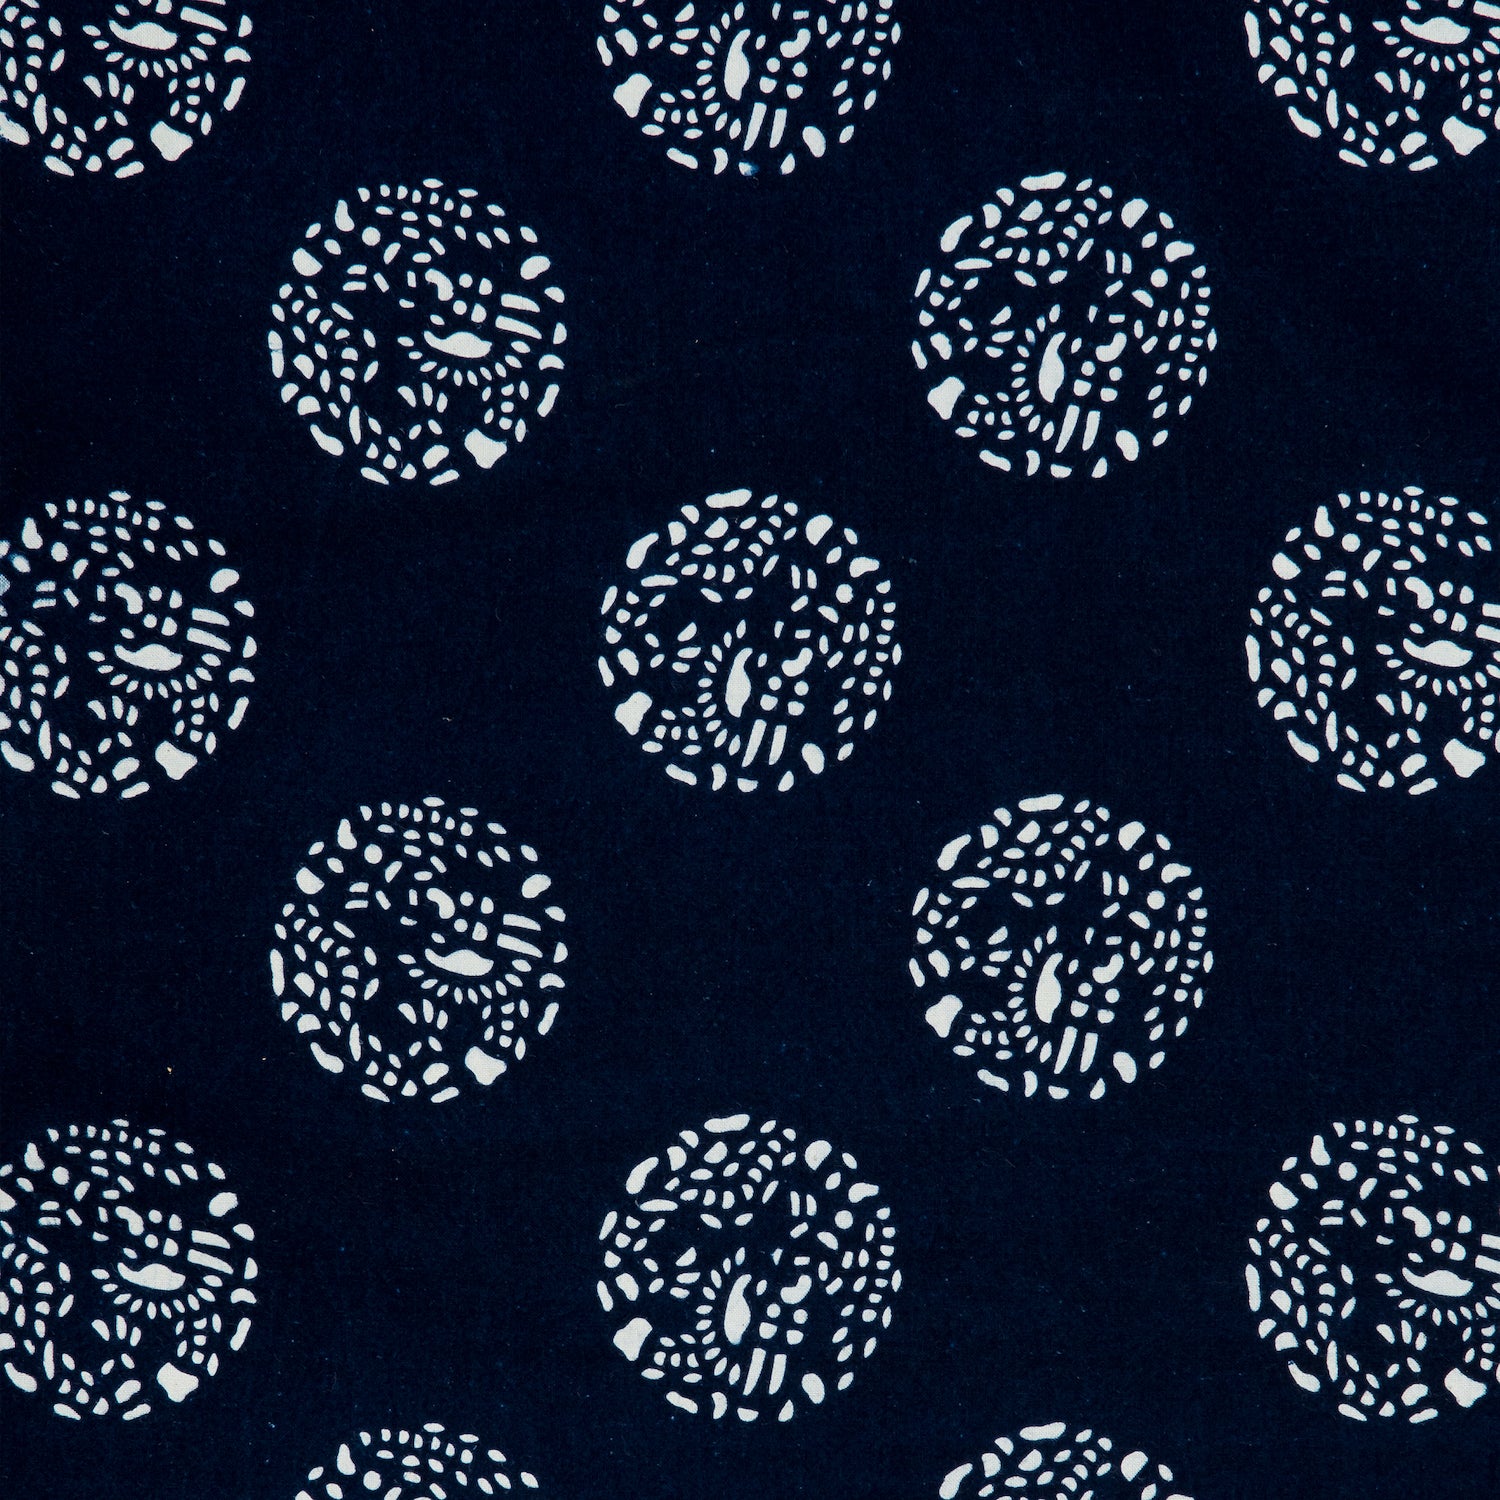 Detail of a printed cotton fabric in a repeating dotted pattern in white on an indigo field.